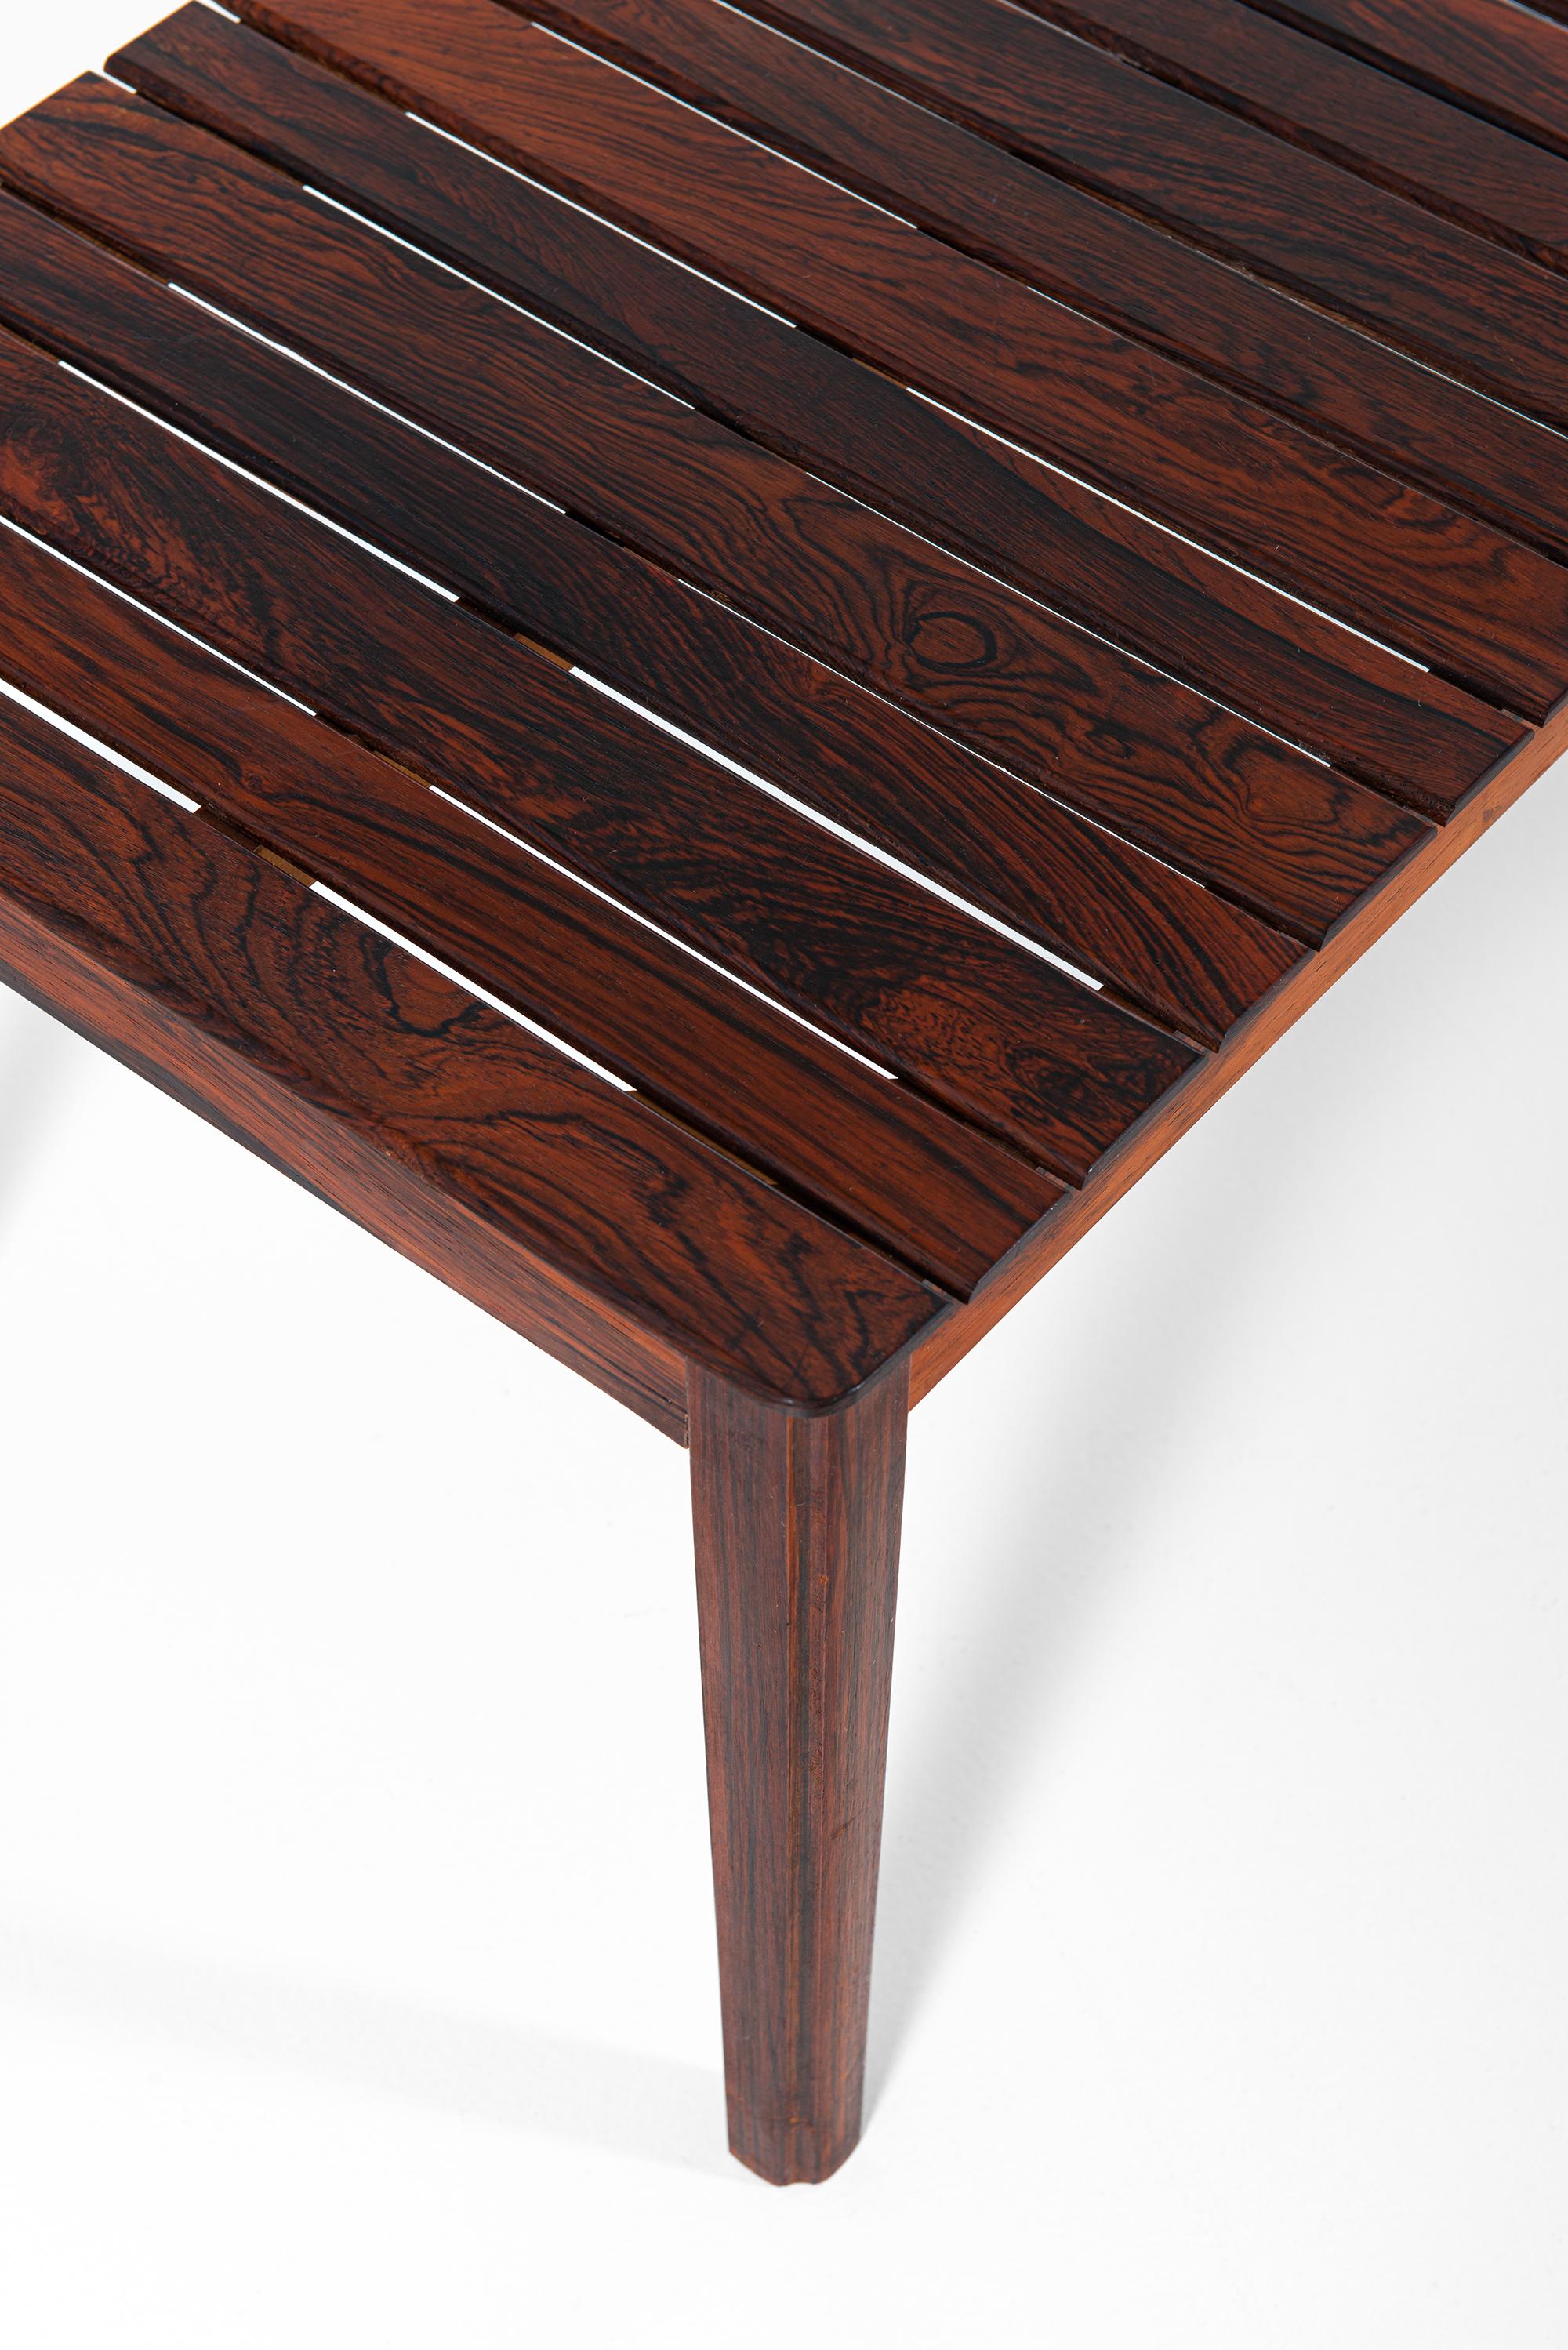 Rare side table / bench in solid rosewood. Produced by Alberts in Tibro, Sweden.